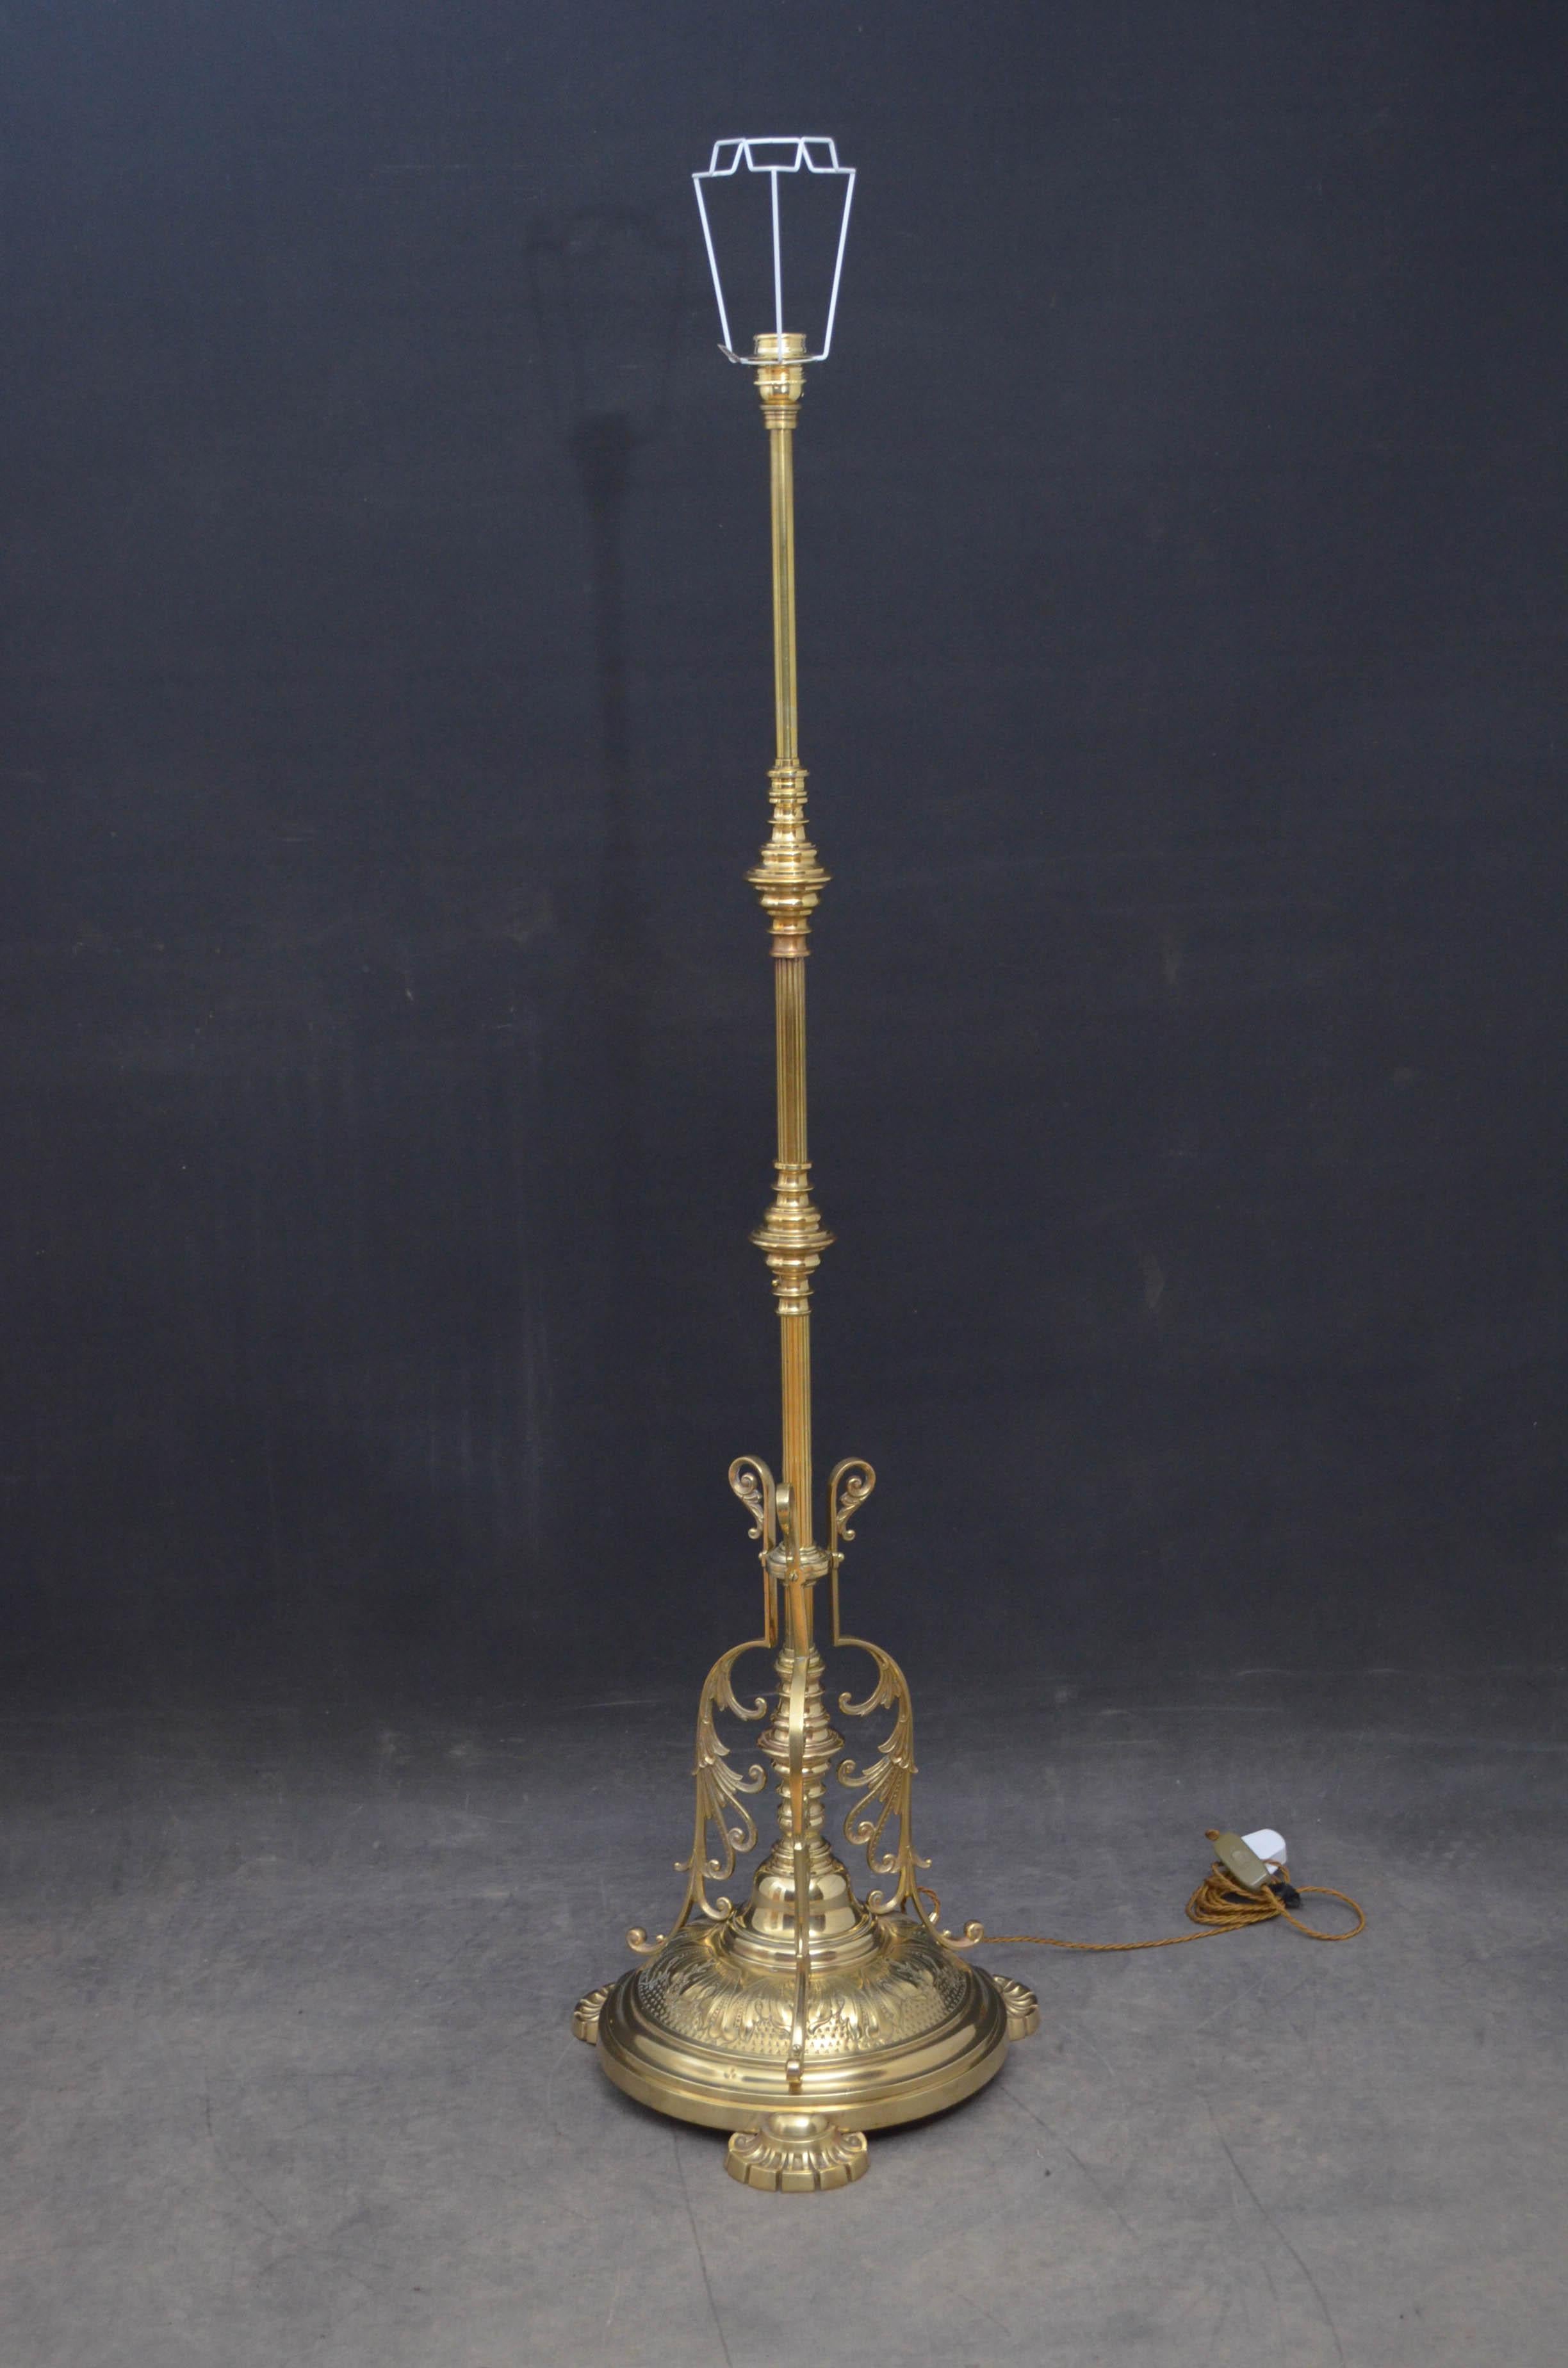 Attractive late Victorian brass floor lamp with reeded column and substantial circular base decorated with acanthus leaves and three scrolled supports, standing on fluted pad feet. This antique lamp has been professionally rewired and is ready to